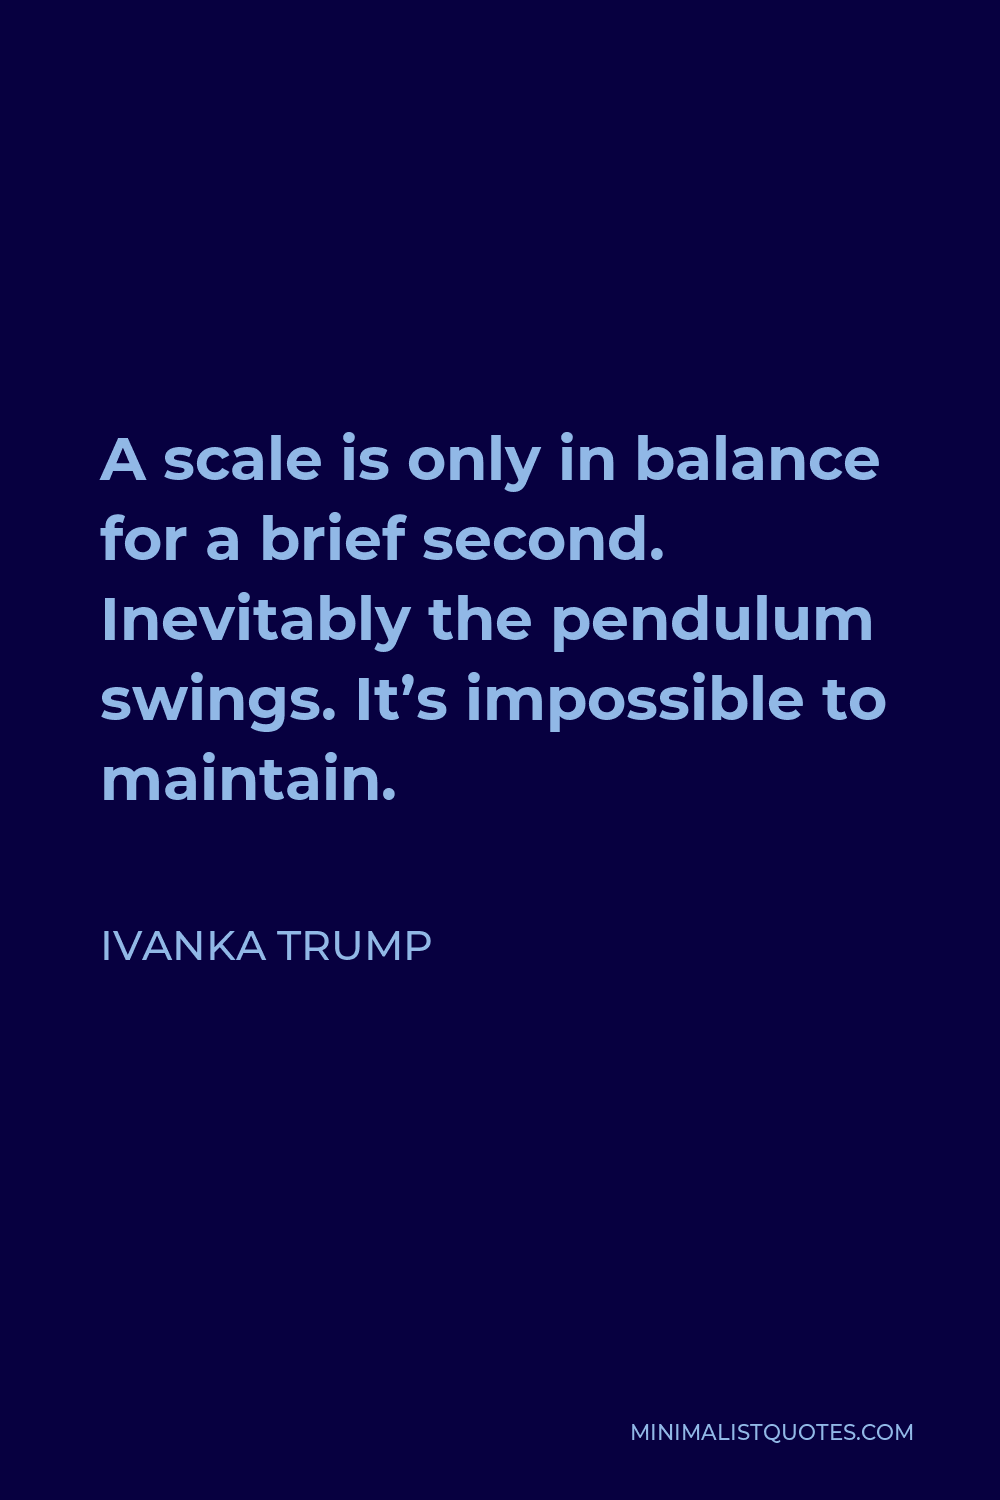 Ivanka Trump Quote - A scale is only in balance for a brief second. Inevitably the pendulum swings. It’s impossible to maintain.